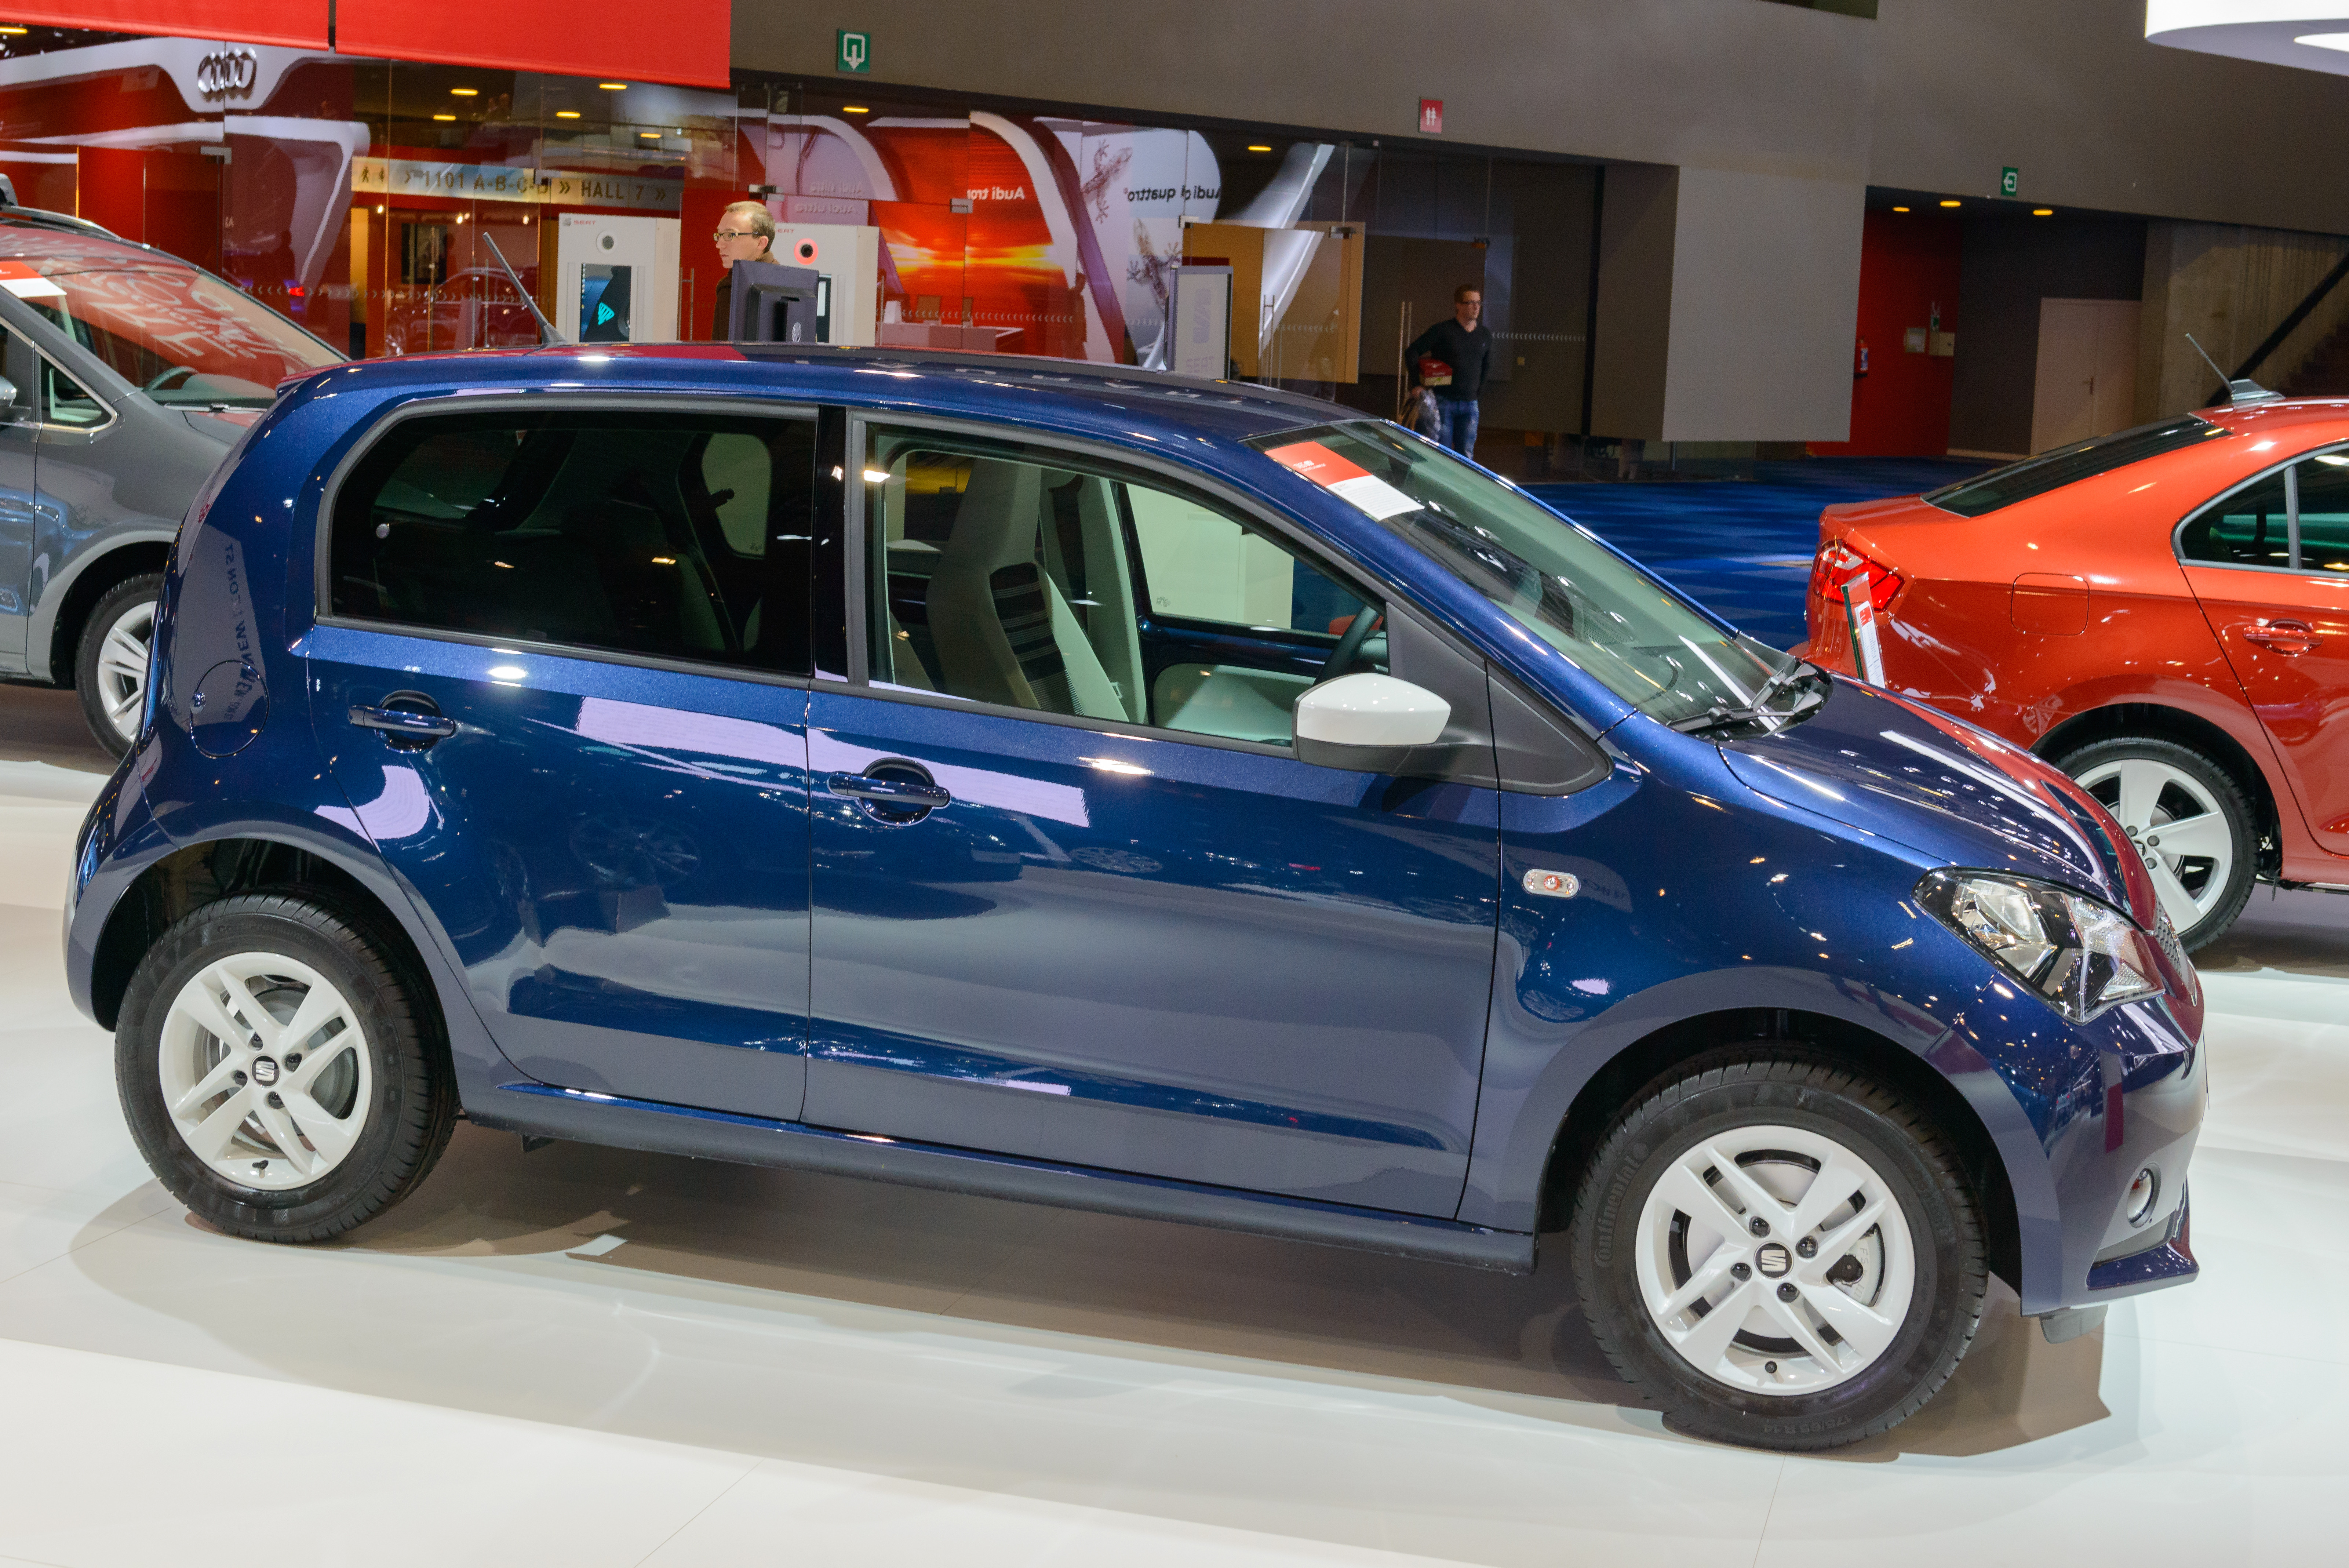 The Seat Mii compact city car was found to lost the most value